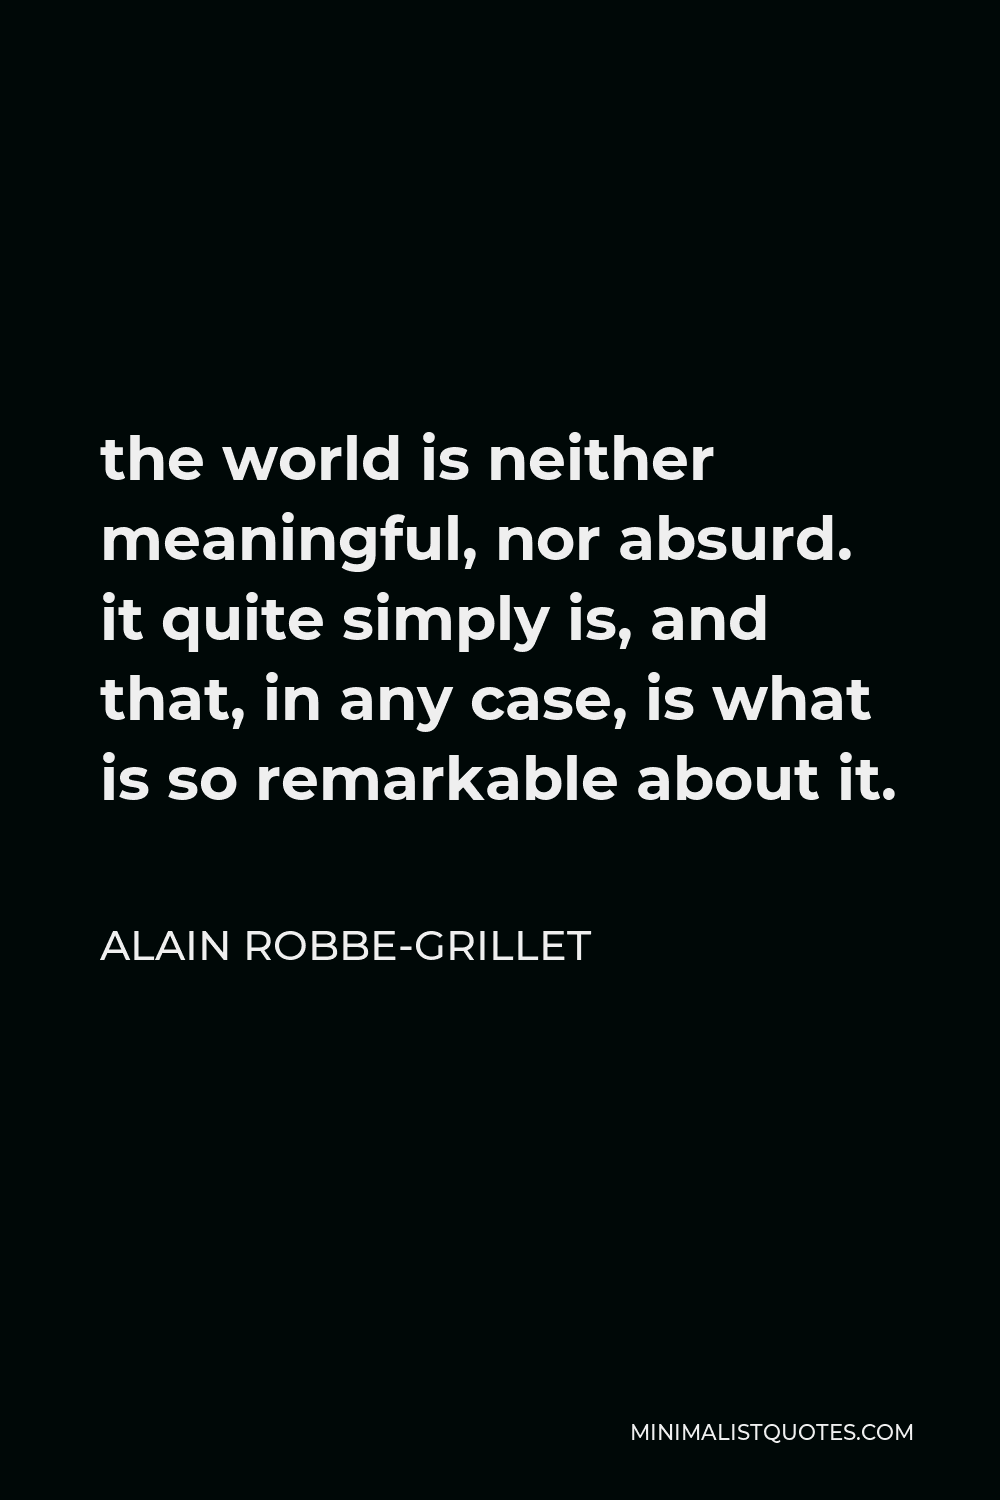 Alain Robbe-Grillet Quote - the world is neither meaningful, nor absurd. it quite simply is, and that, in any case, is what is so remarkable about it.